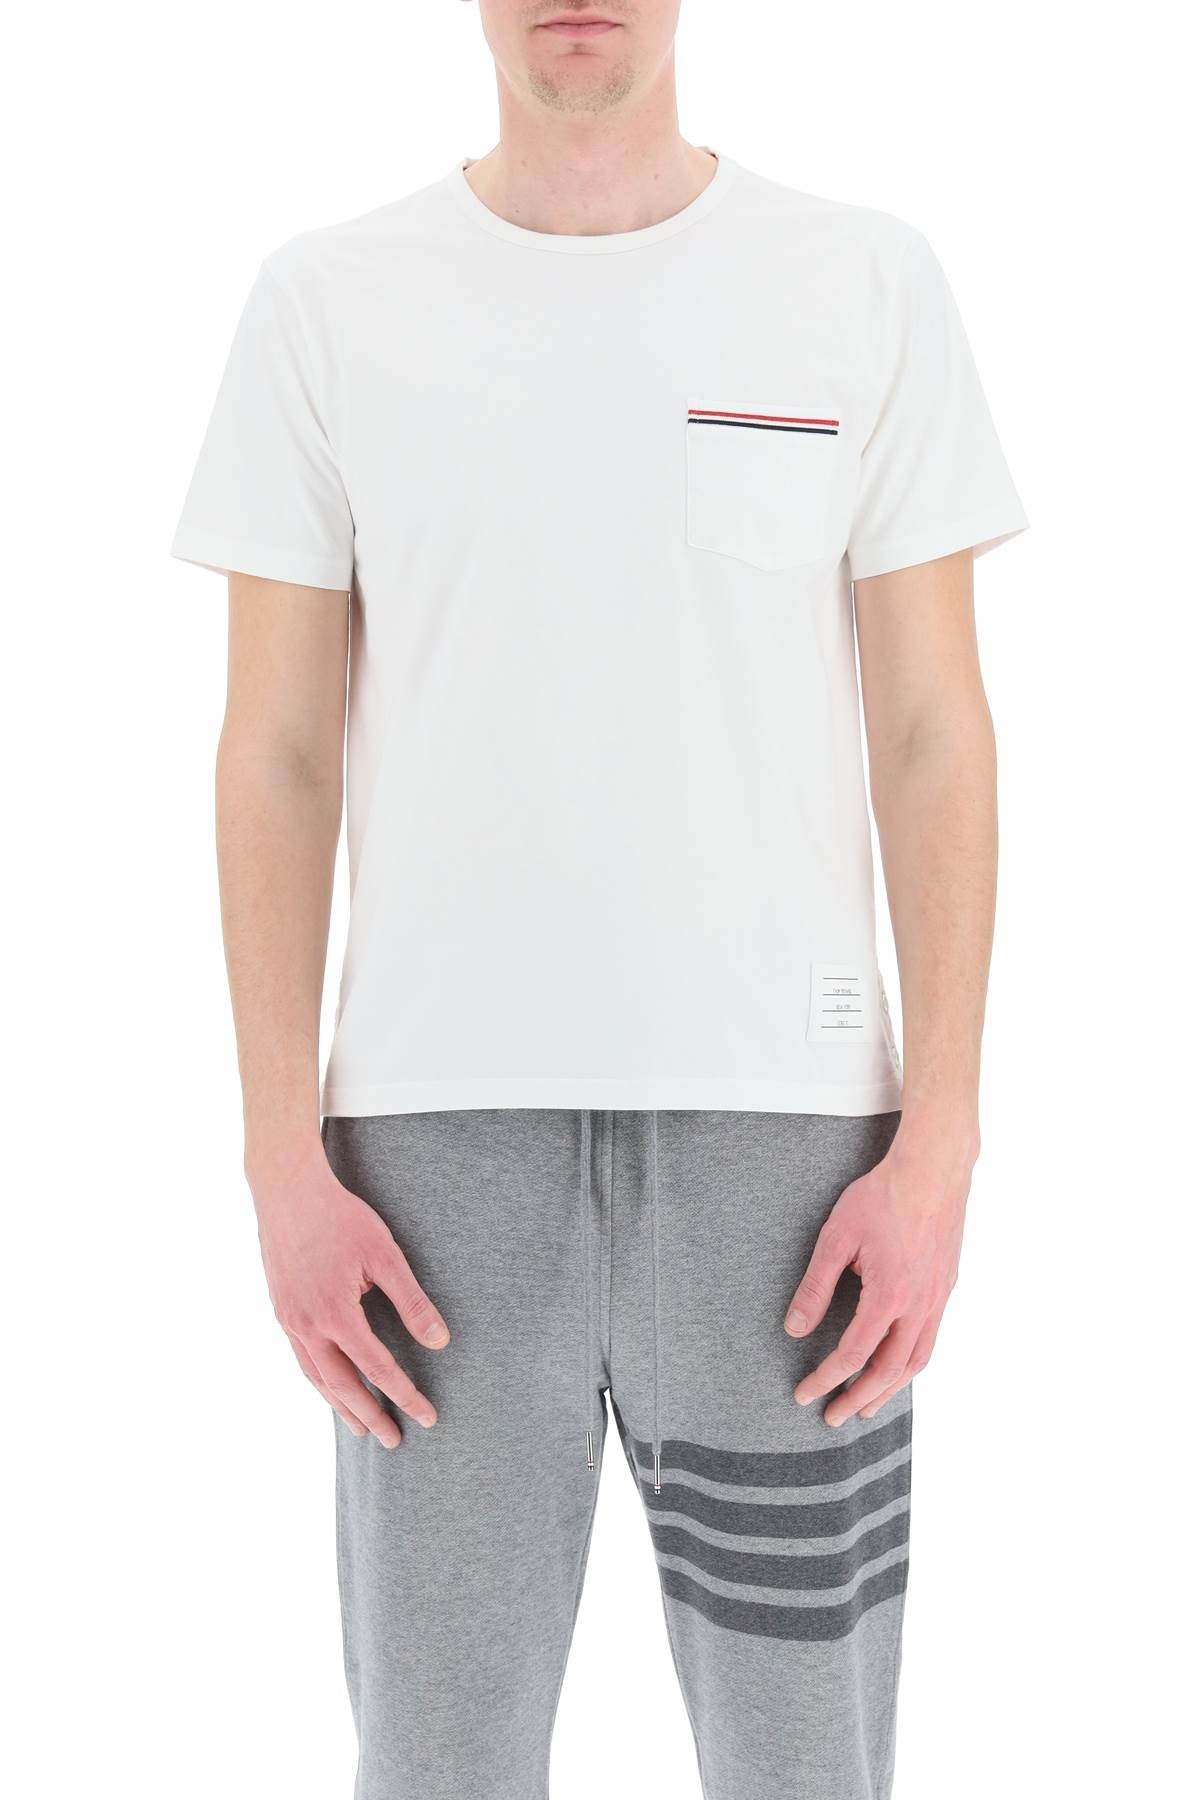 Thom Browne T-Shirt With Tricolor Pocket Men - 2